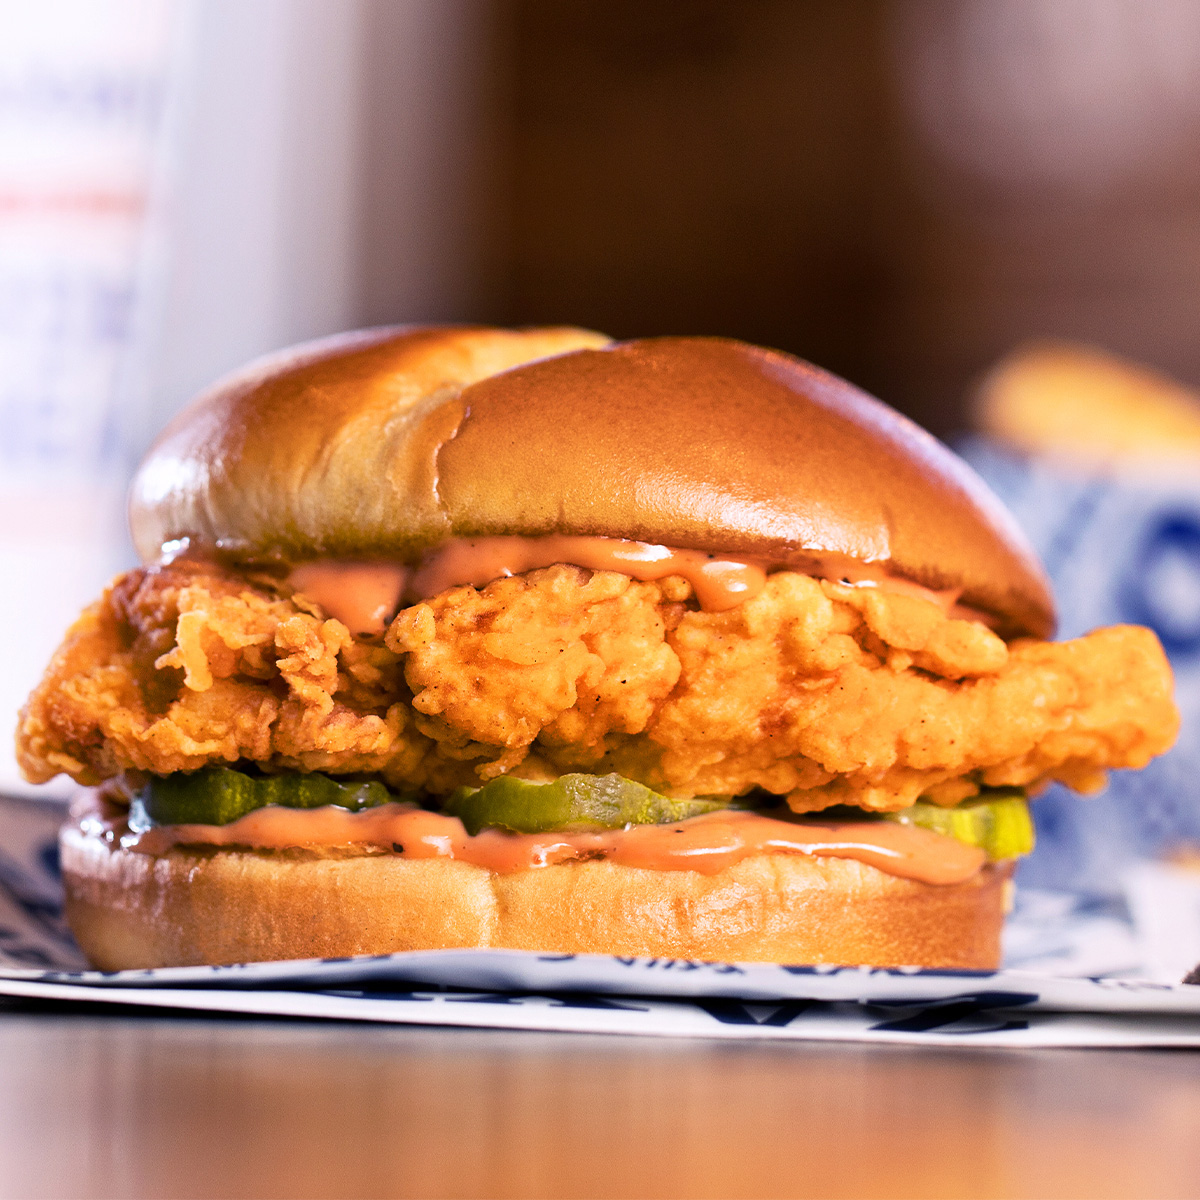 Now available everywhere, Zaxby's Signature Sandwich features a double hand-breaded fillet, with three thick-sliced, crinkle-cut pickle chips and served on a buttery toasted, split-top potato bun with a choice of Zax Sauce or Spicy Zax Sauce.